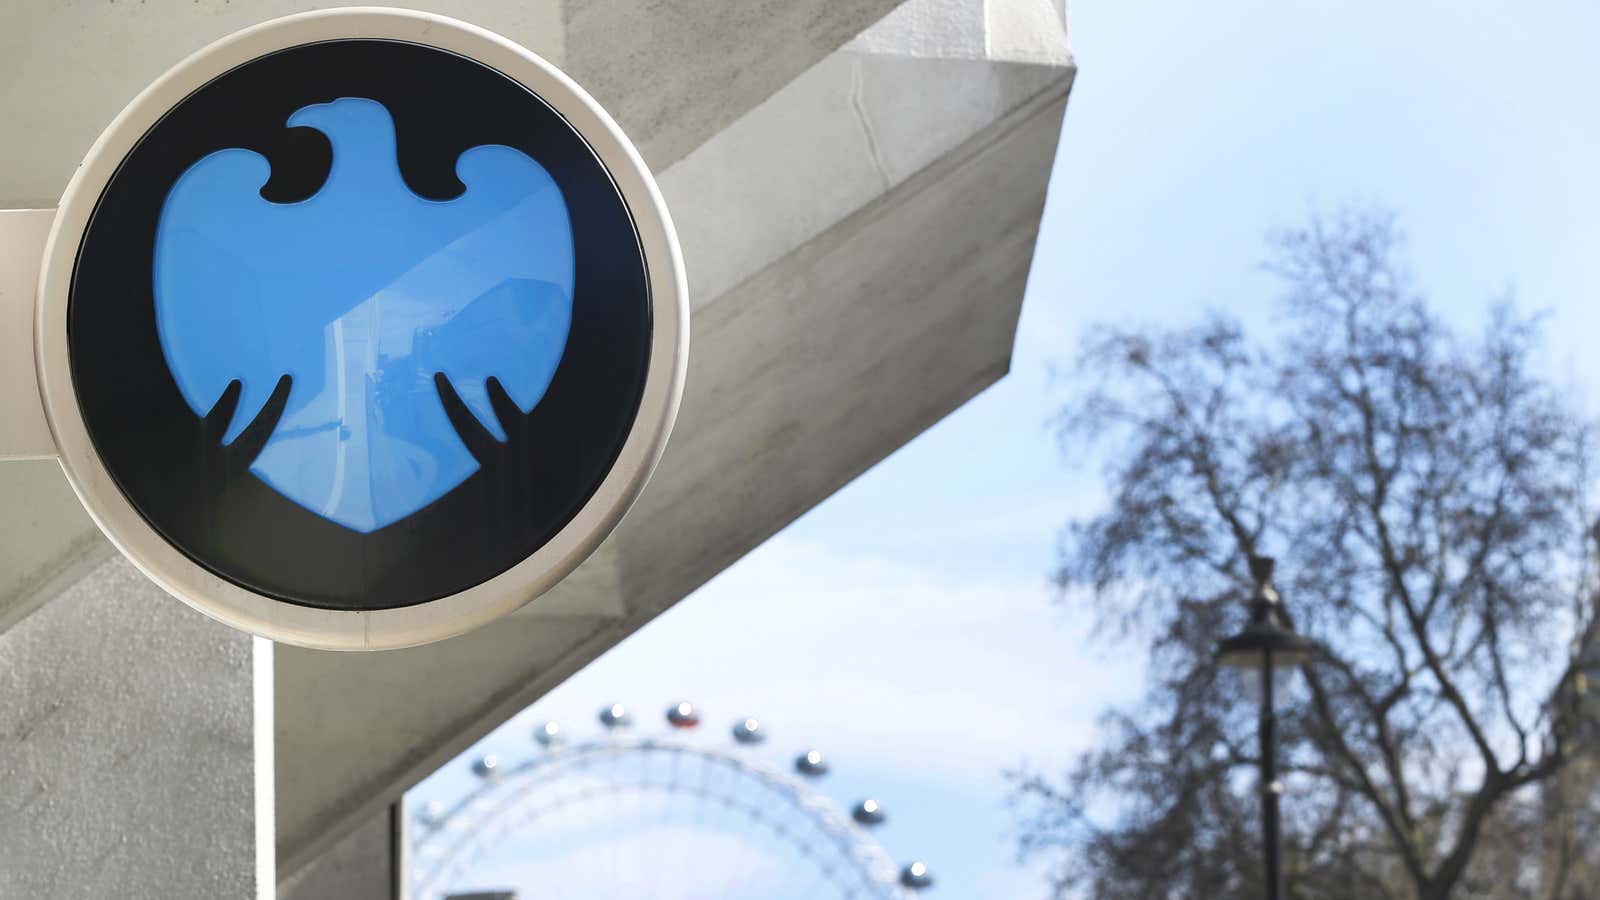 The slow, painful process of Barclays’ image makeover is underway.